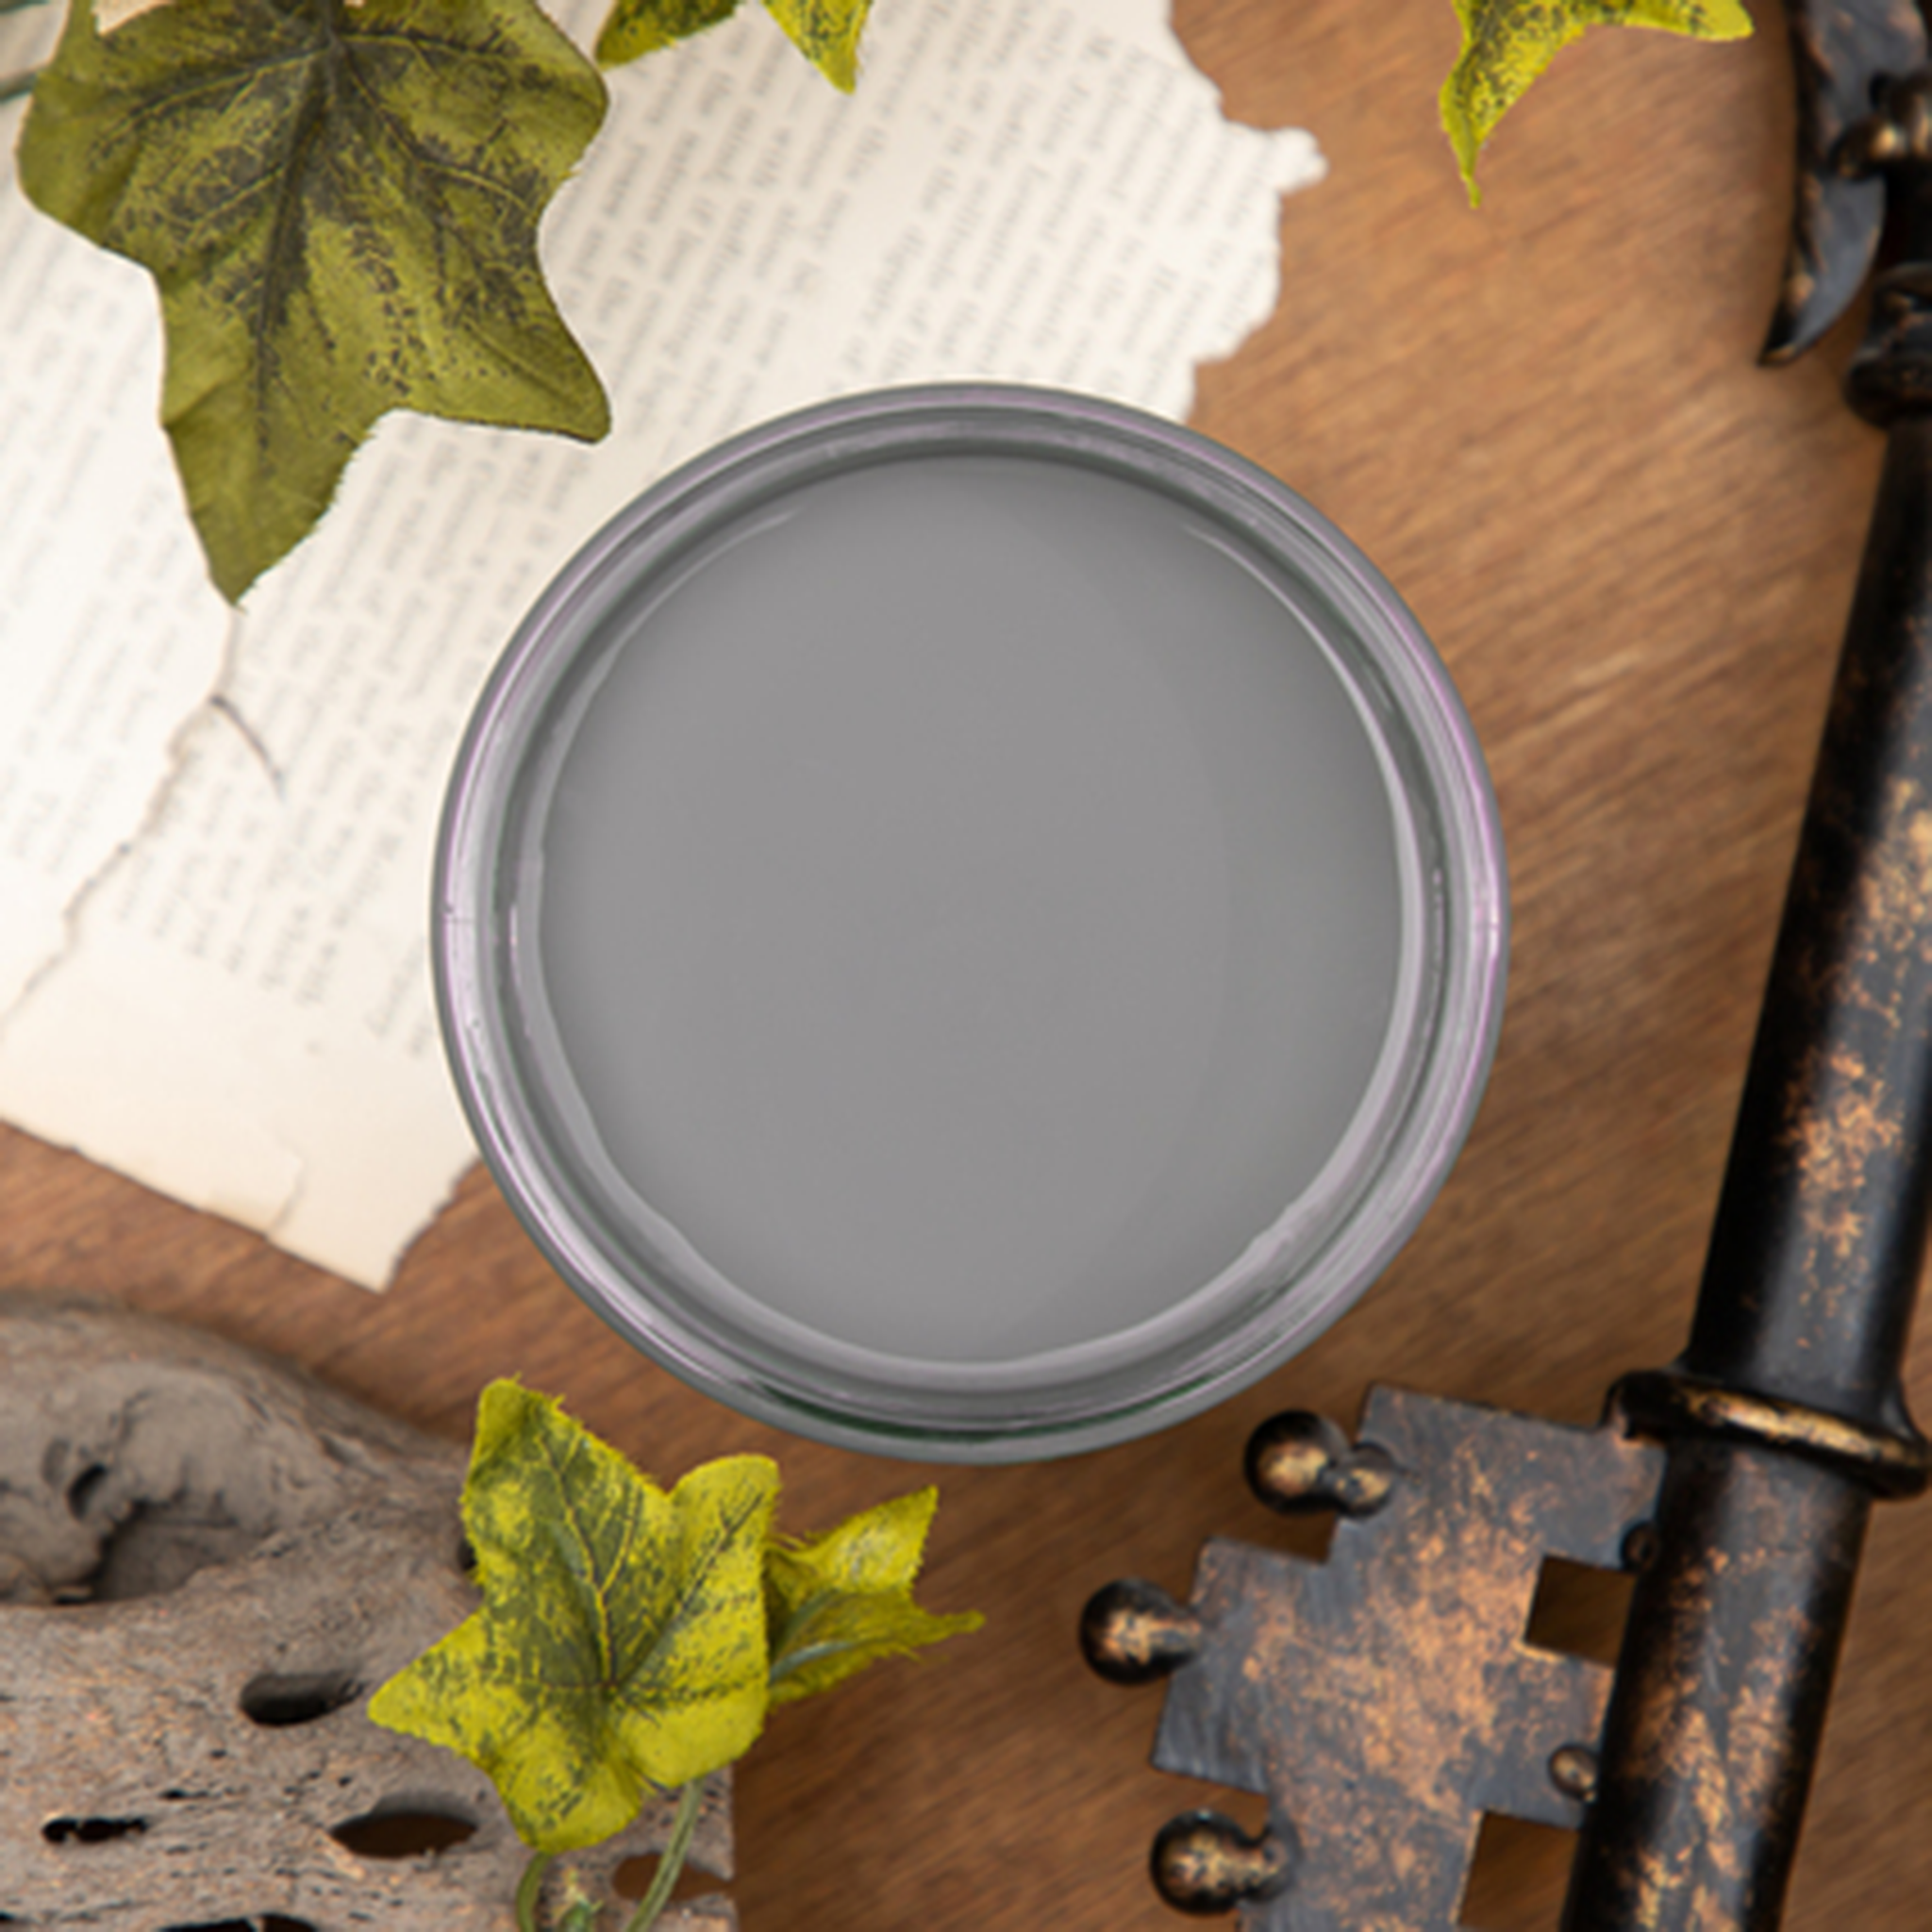 An arial view of an open container of Dixie Belle Paint Company’s Hurricane Gray Chalk Mineral Paint is against a wood background with leaves, a vintage key, and a torn piece of parchment.